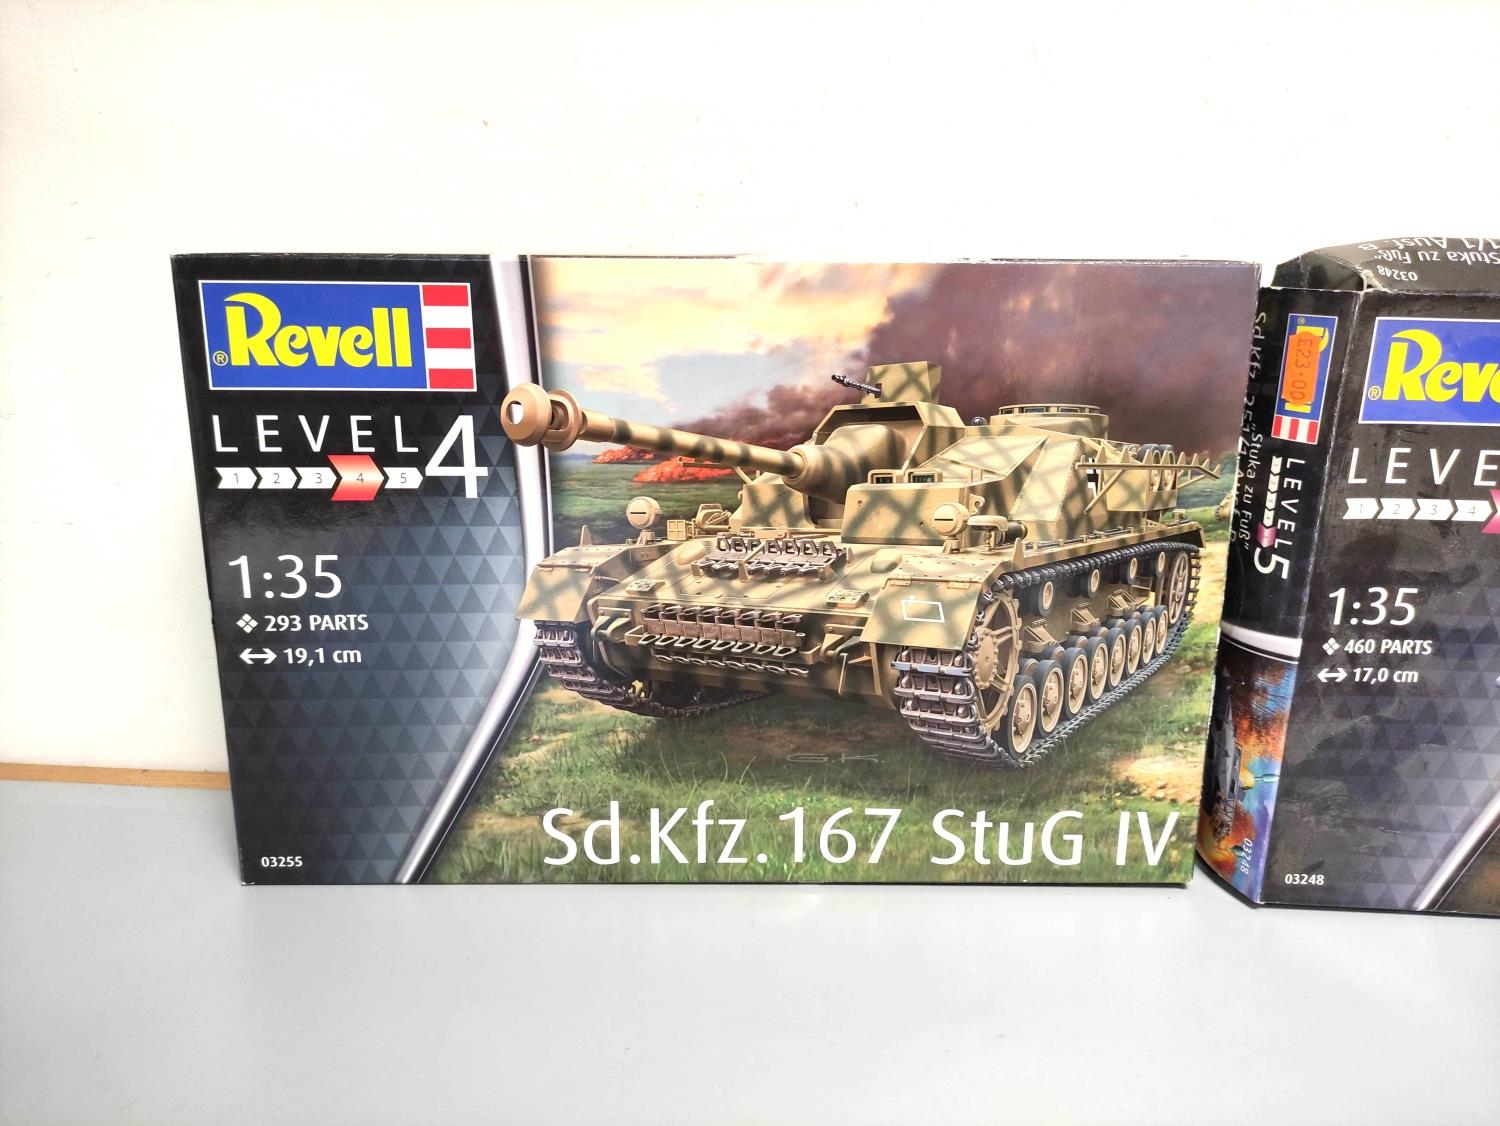 Six 1:35 scale boxed model construction kits to include a Revell Sd.Kfz.167 Stug IV 03255, a - Image 3 of 4